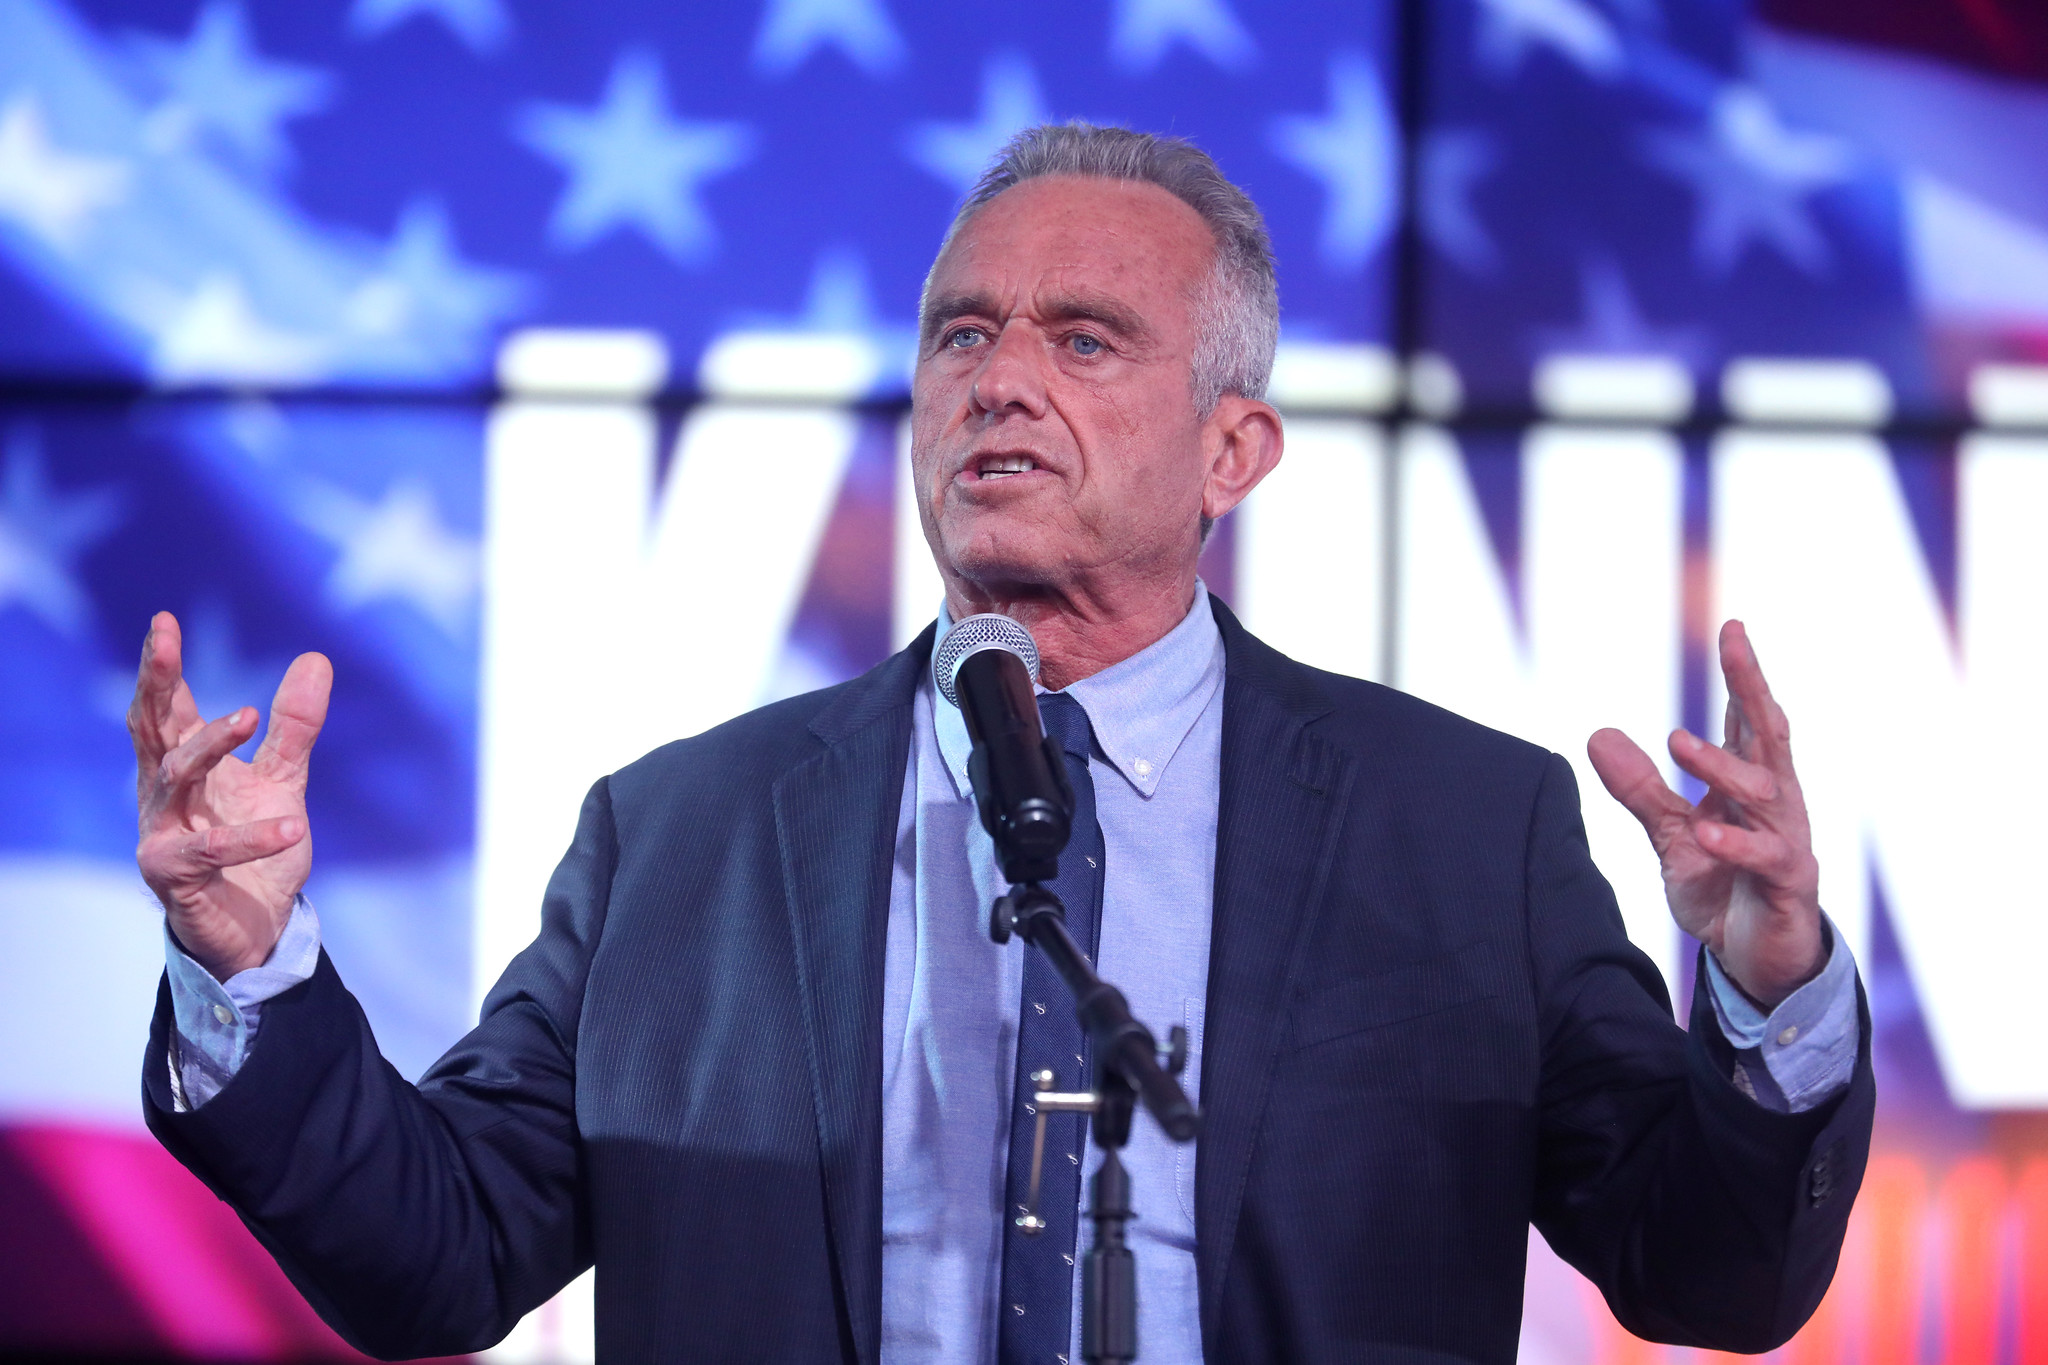 Robert F Kennedy Jr to Speak at Calif. Libertarian Party Convention